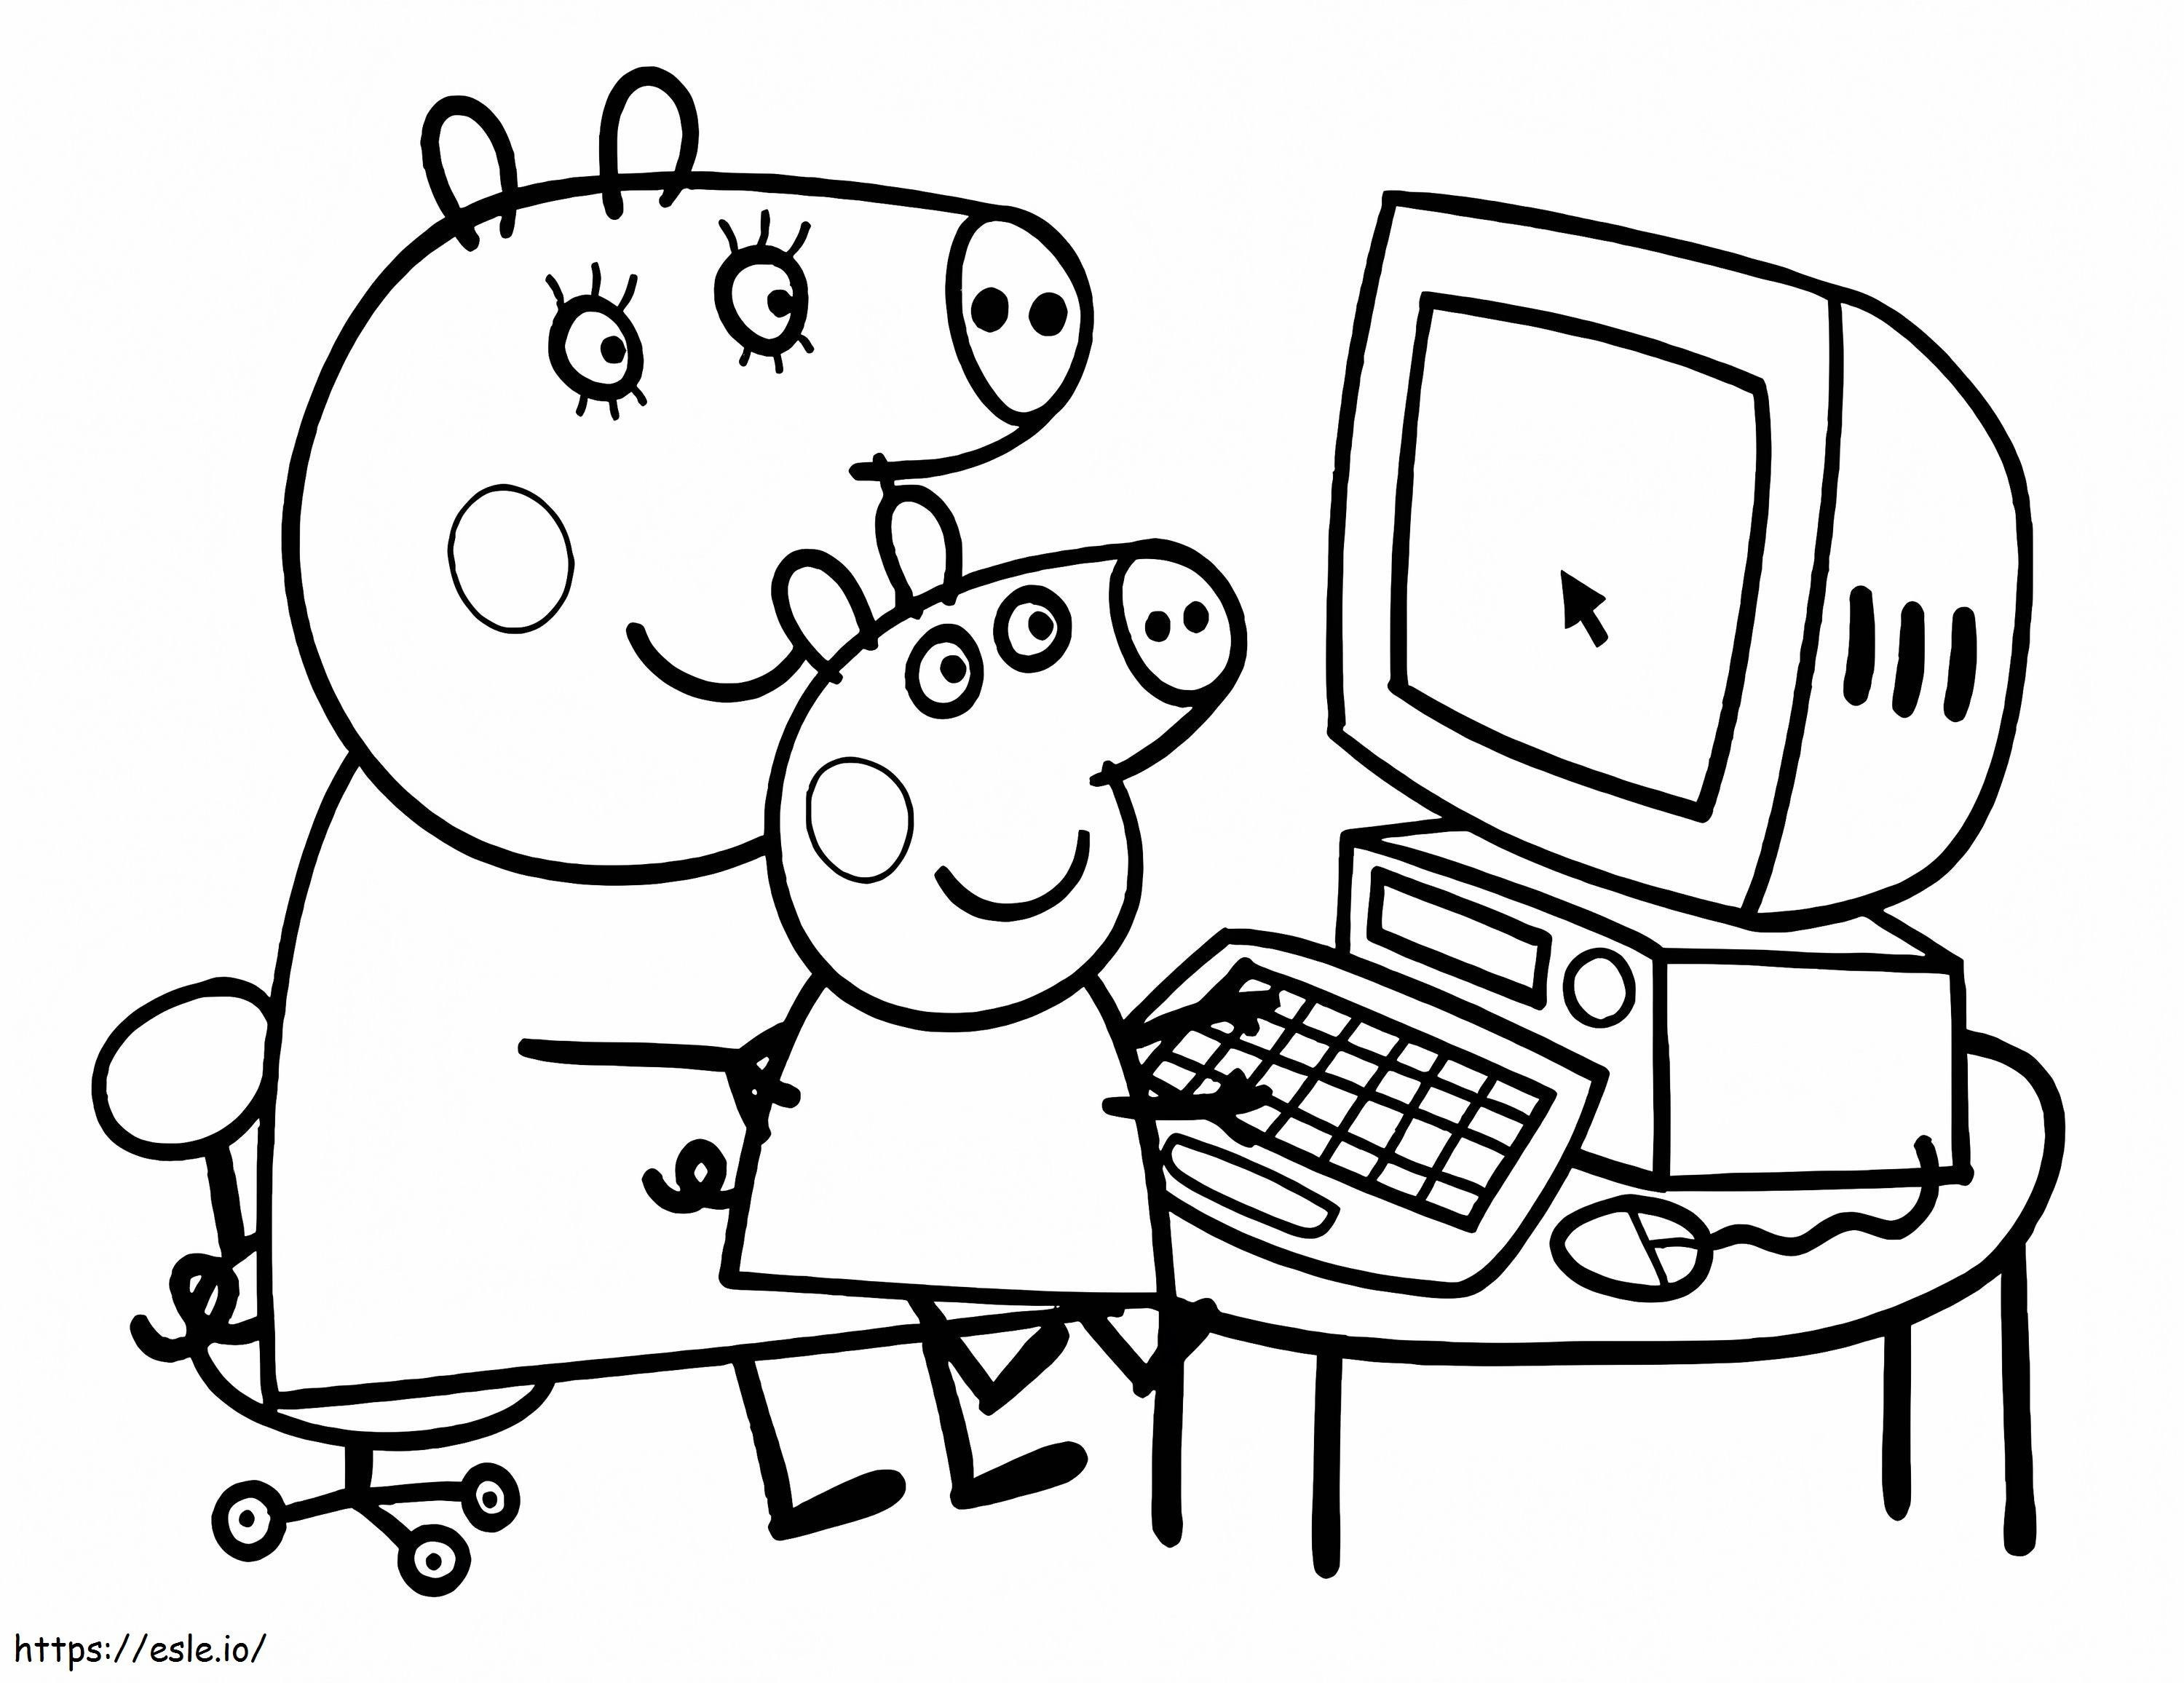 Peppa Pig And Mummy Pig coloring page